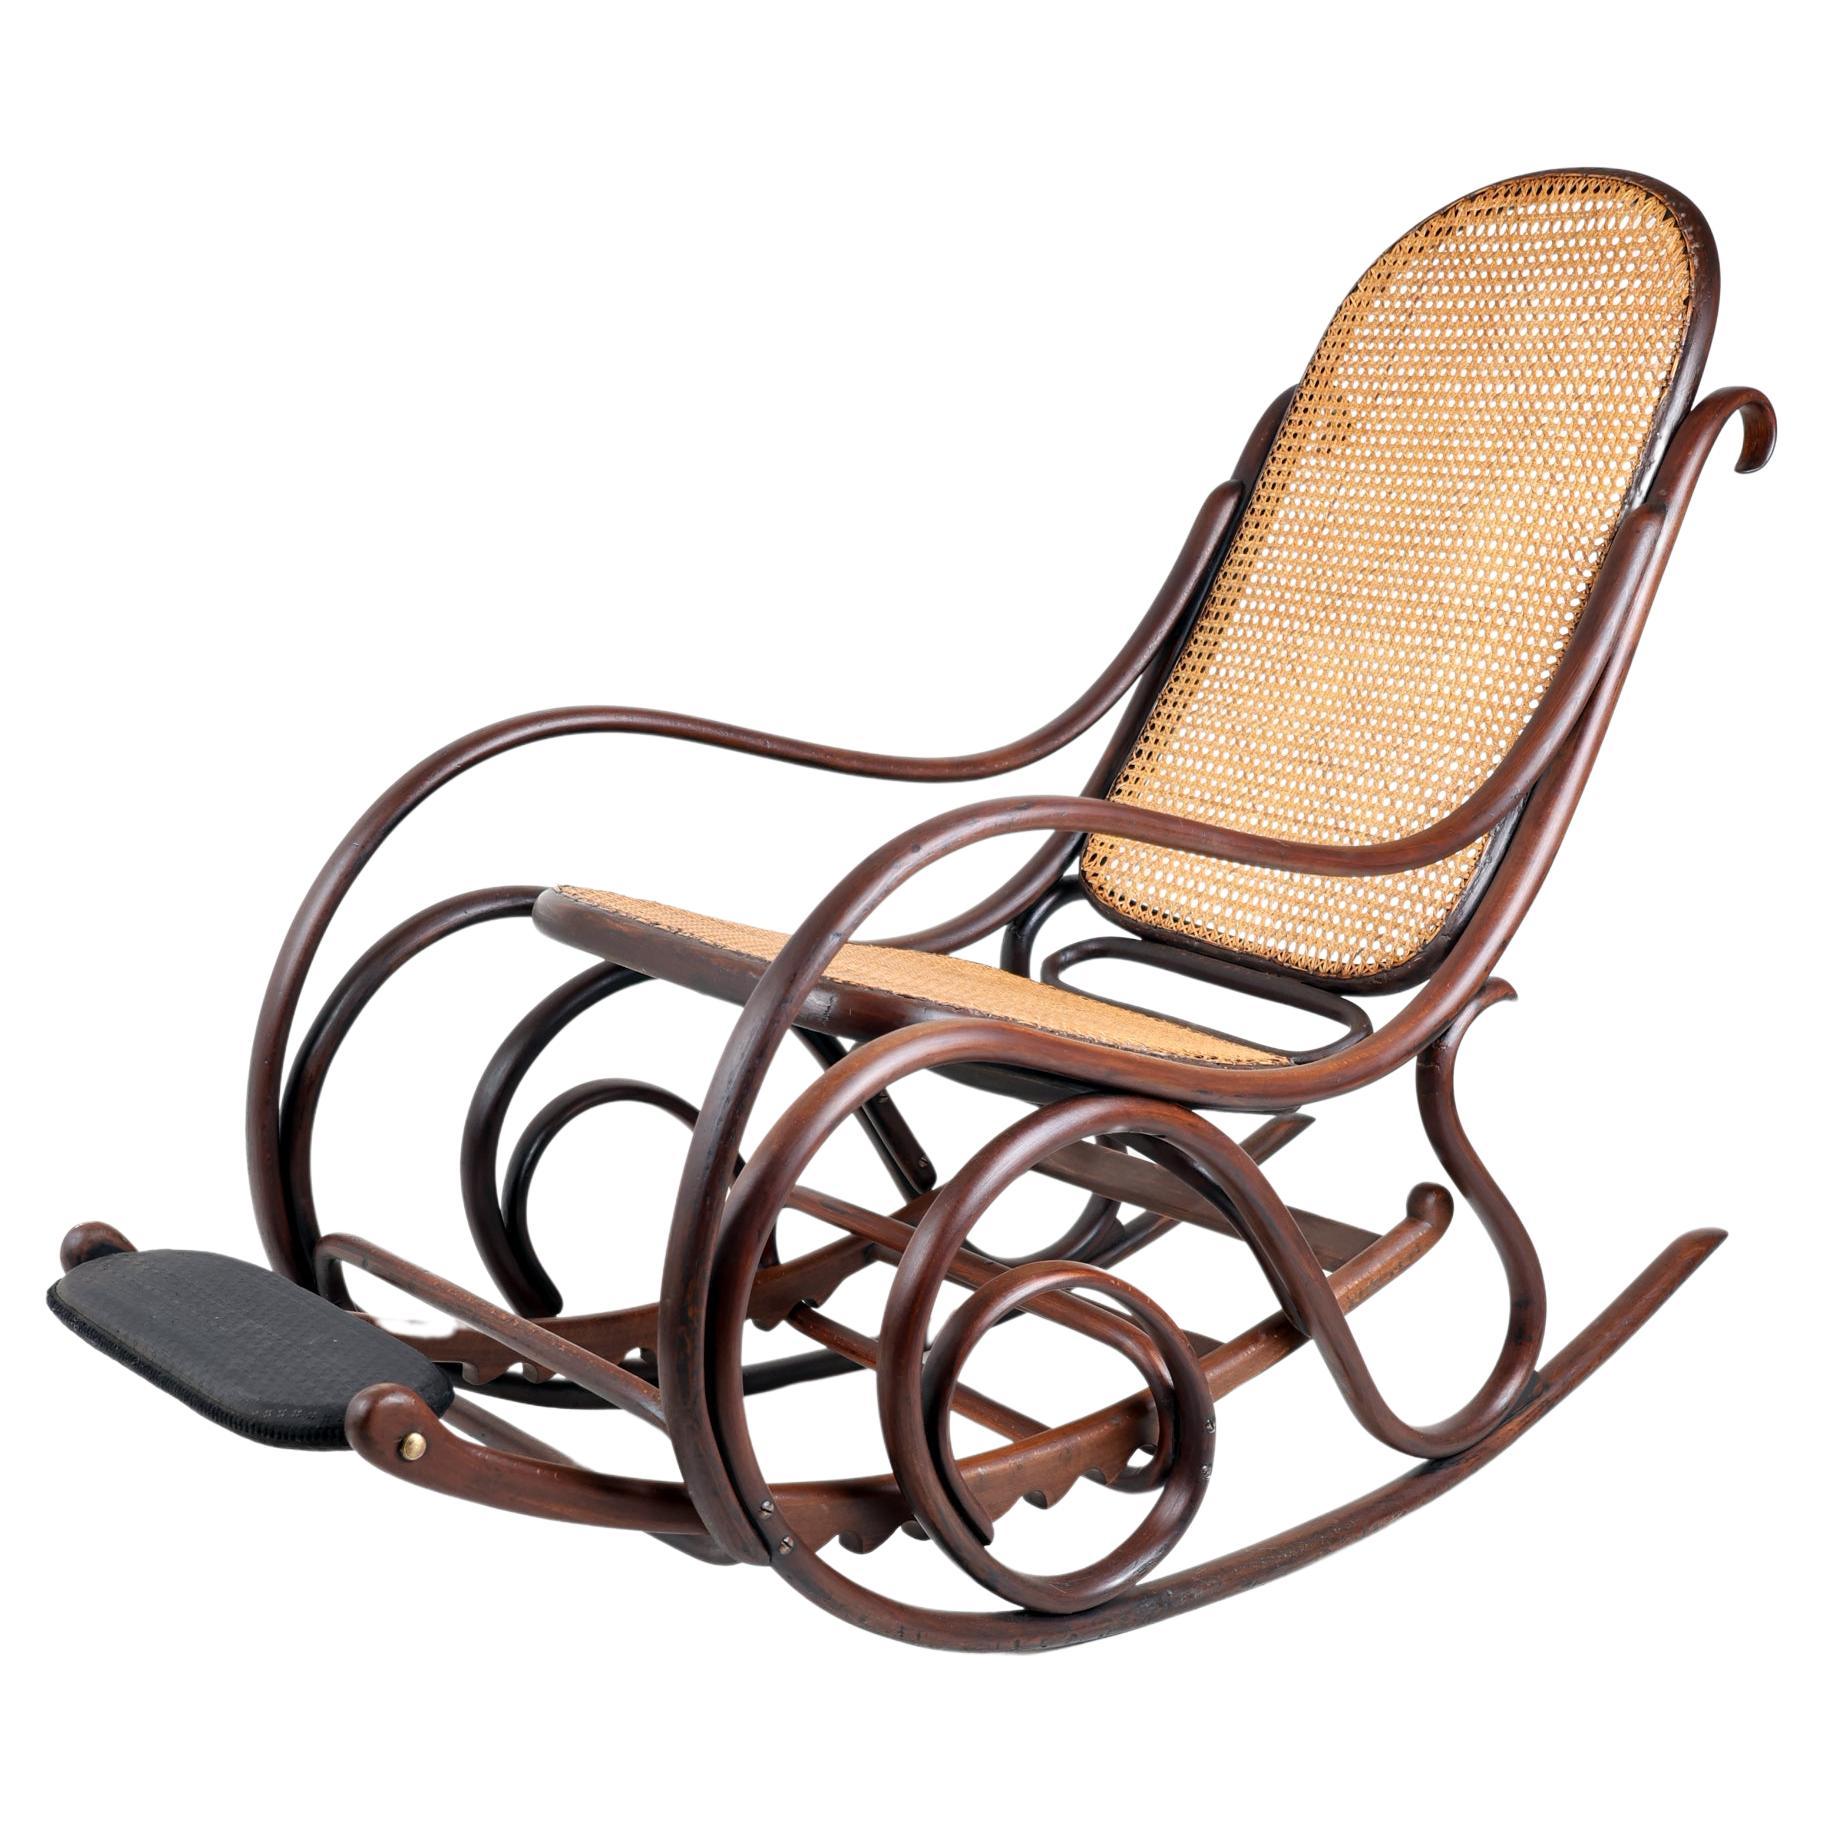 Rocking Chair And Its Footrest, Beech, Spirit "Thonet" 1900 For Sale